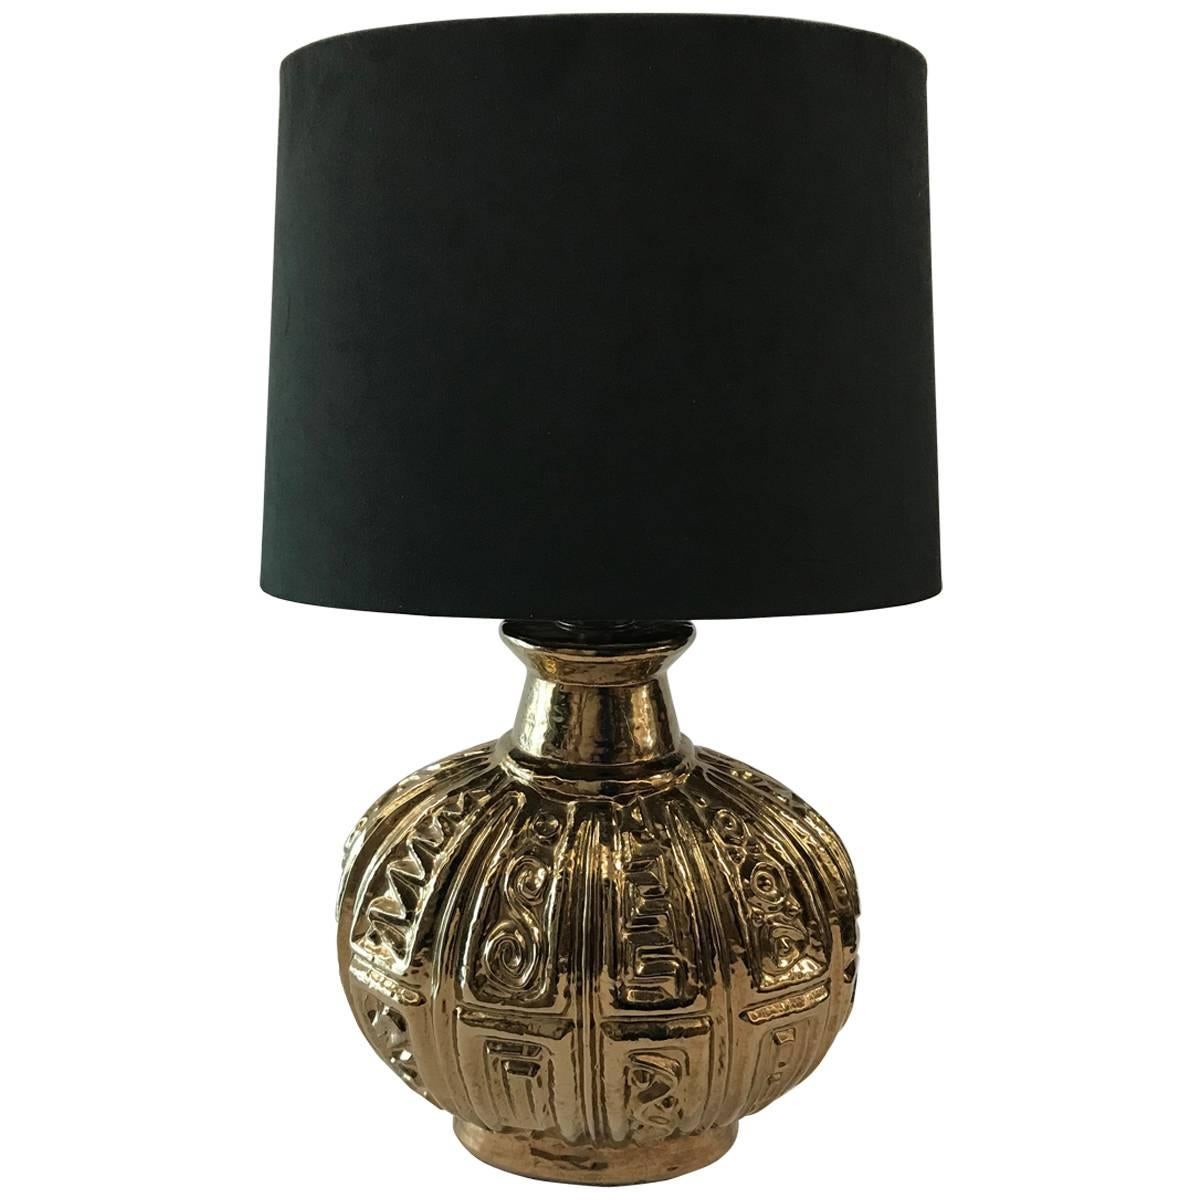 Mid-20th Century American Ceramic Lamp with Custom Brown Suede Shade For Sale